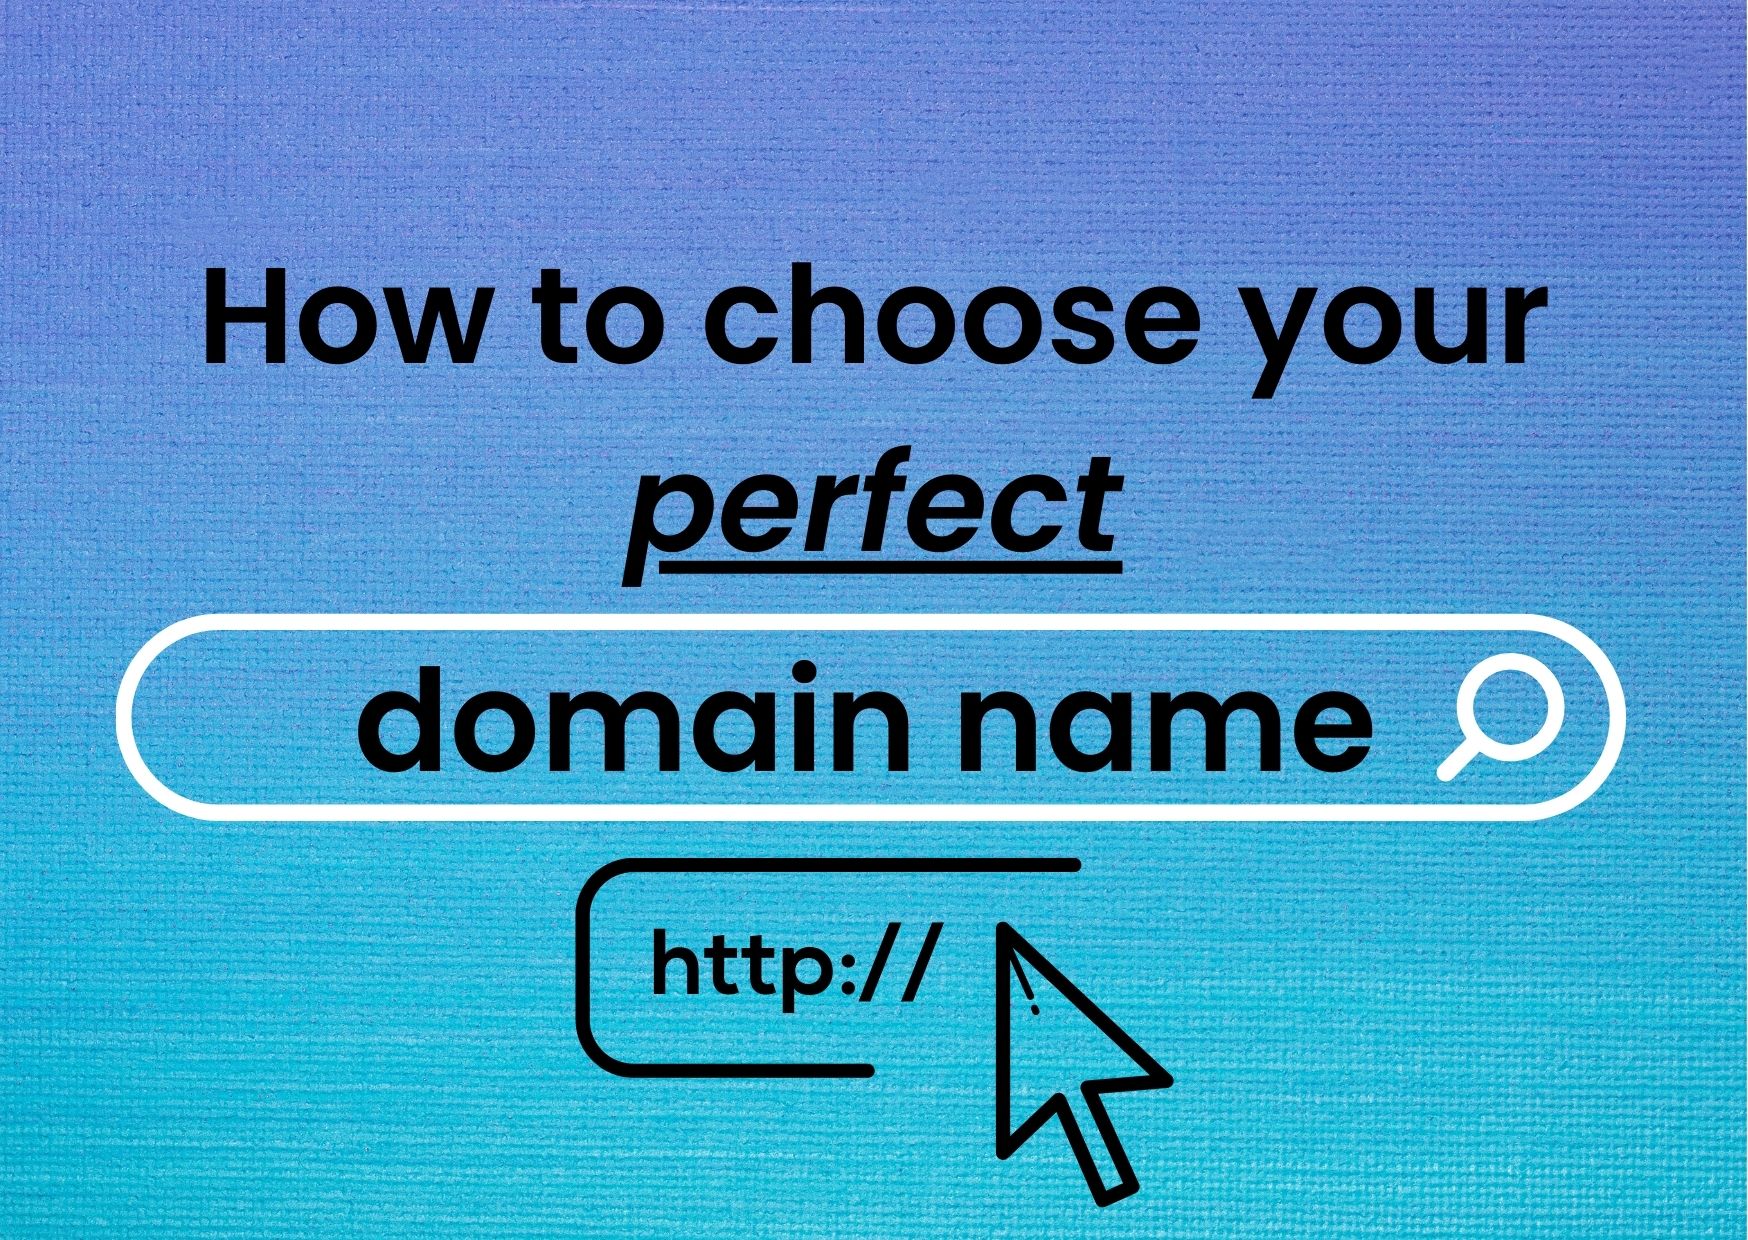 How to choose your perfect domain name